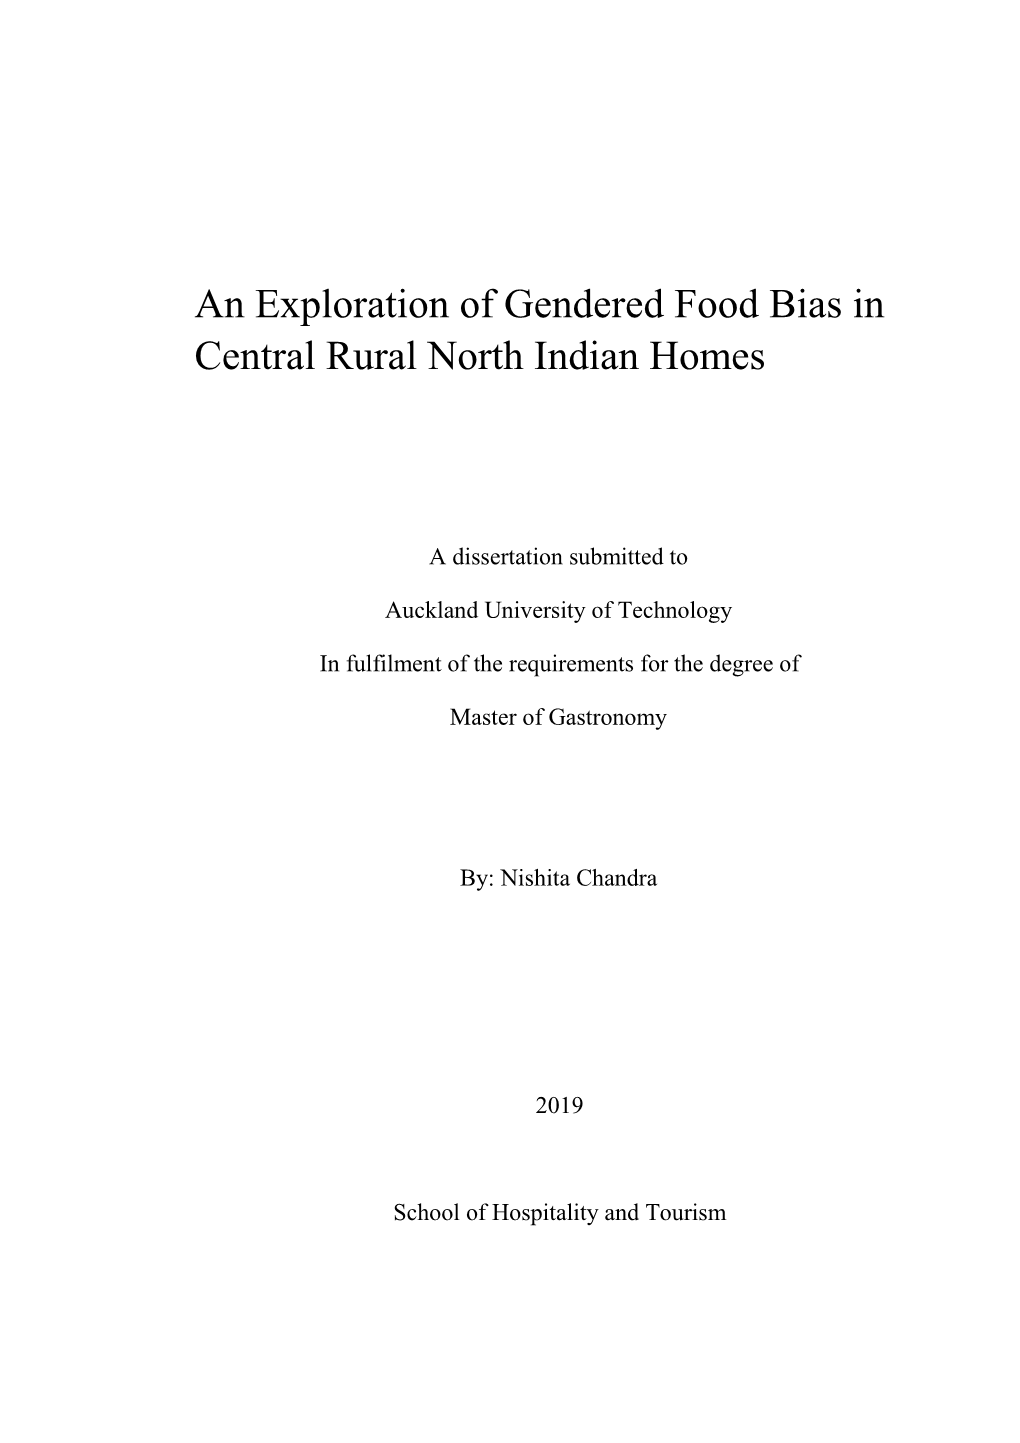 An Exploration of Gendered Food Bias in Central Rural North Indian Homes